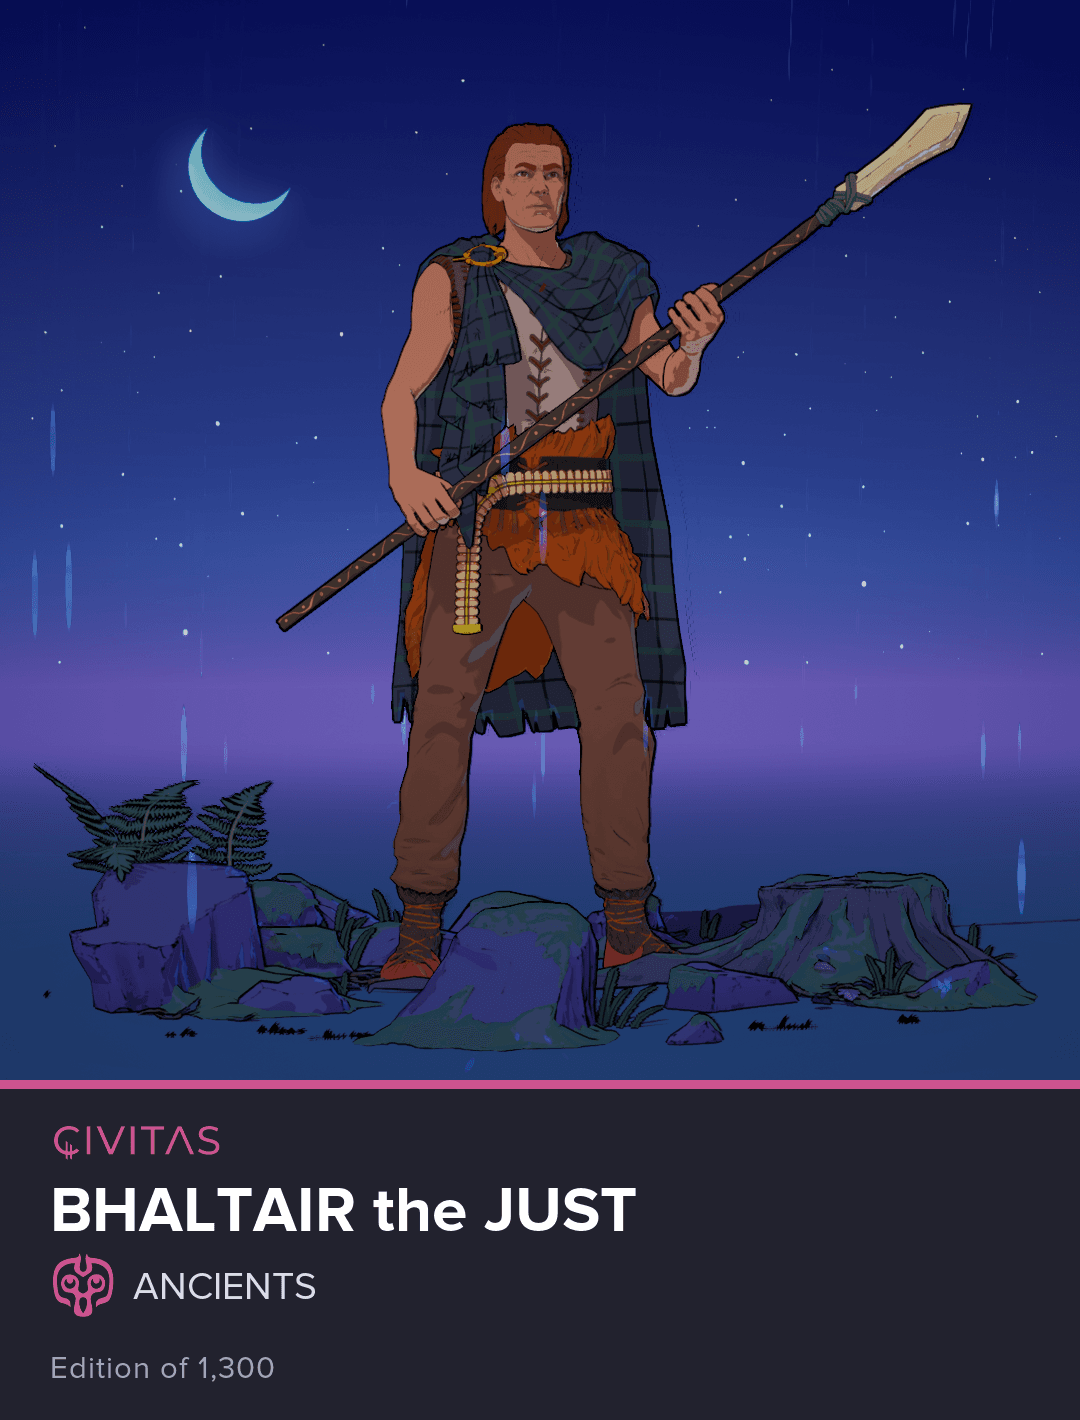 Bhaltair the Just #546